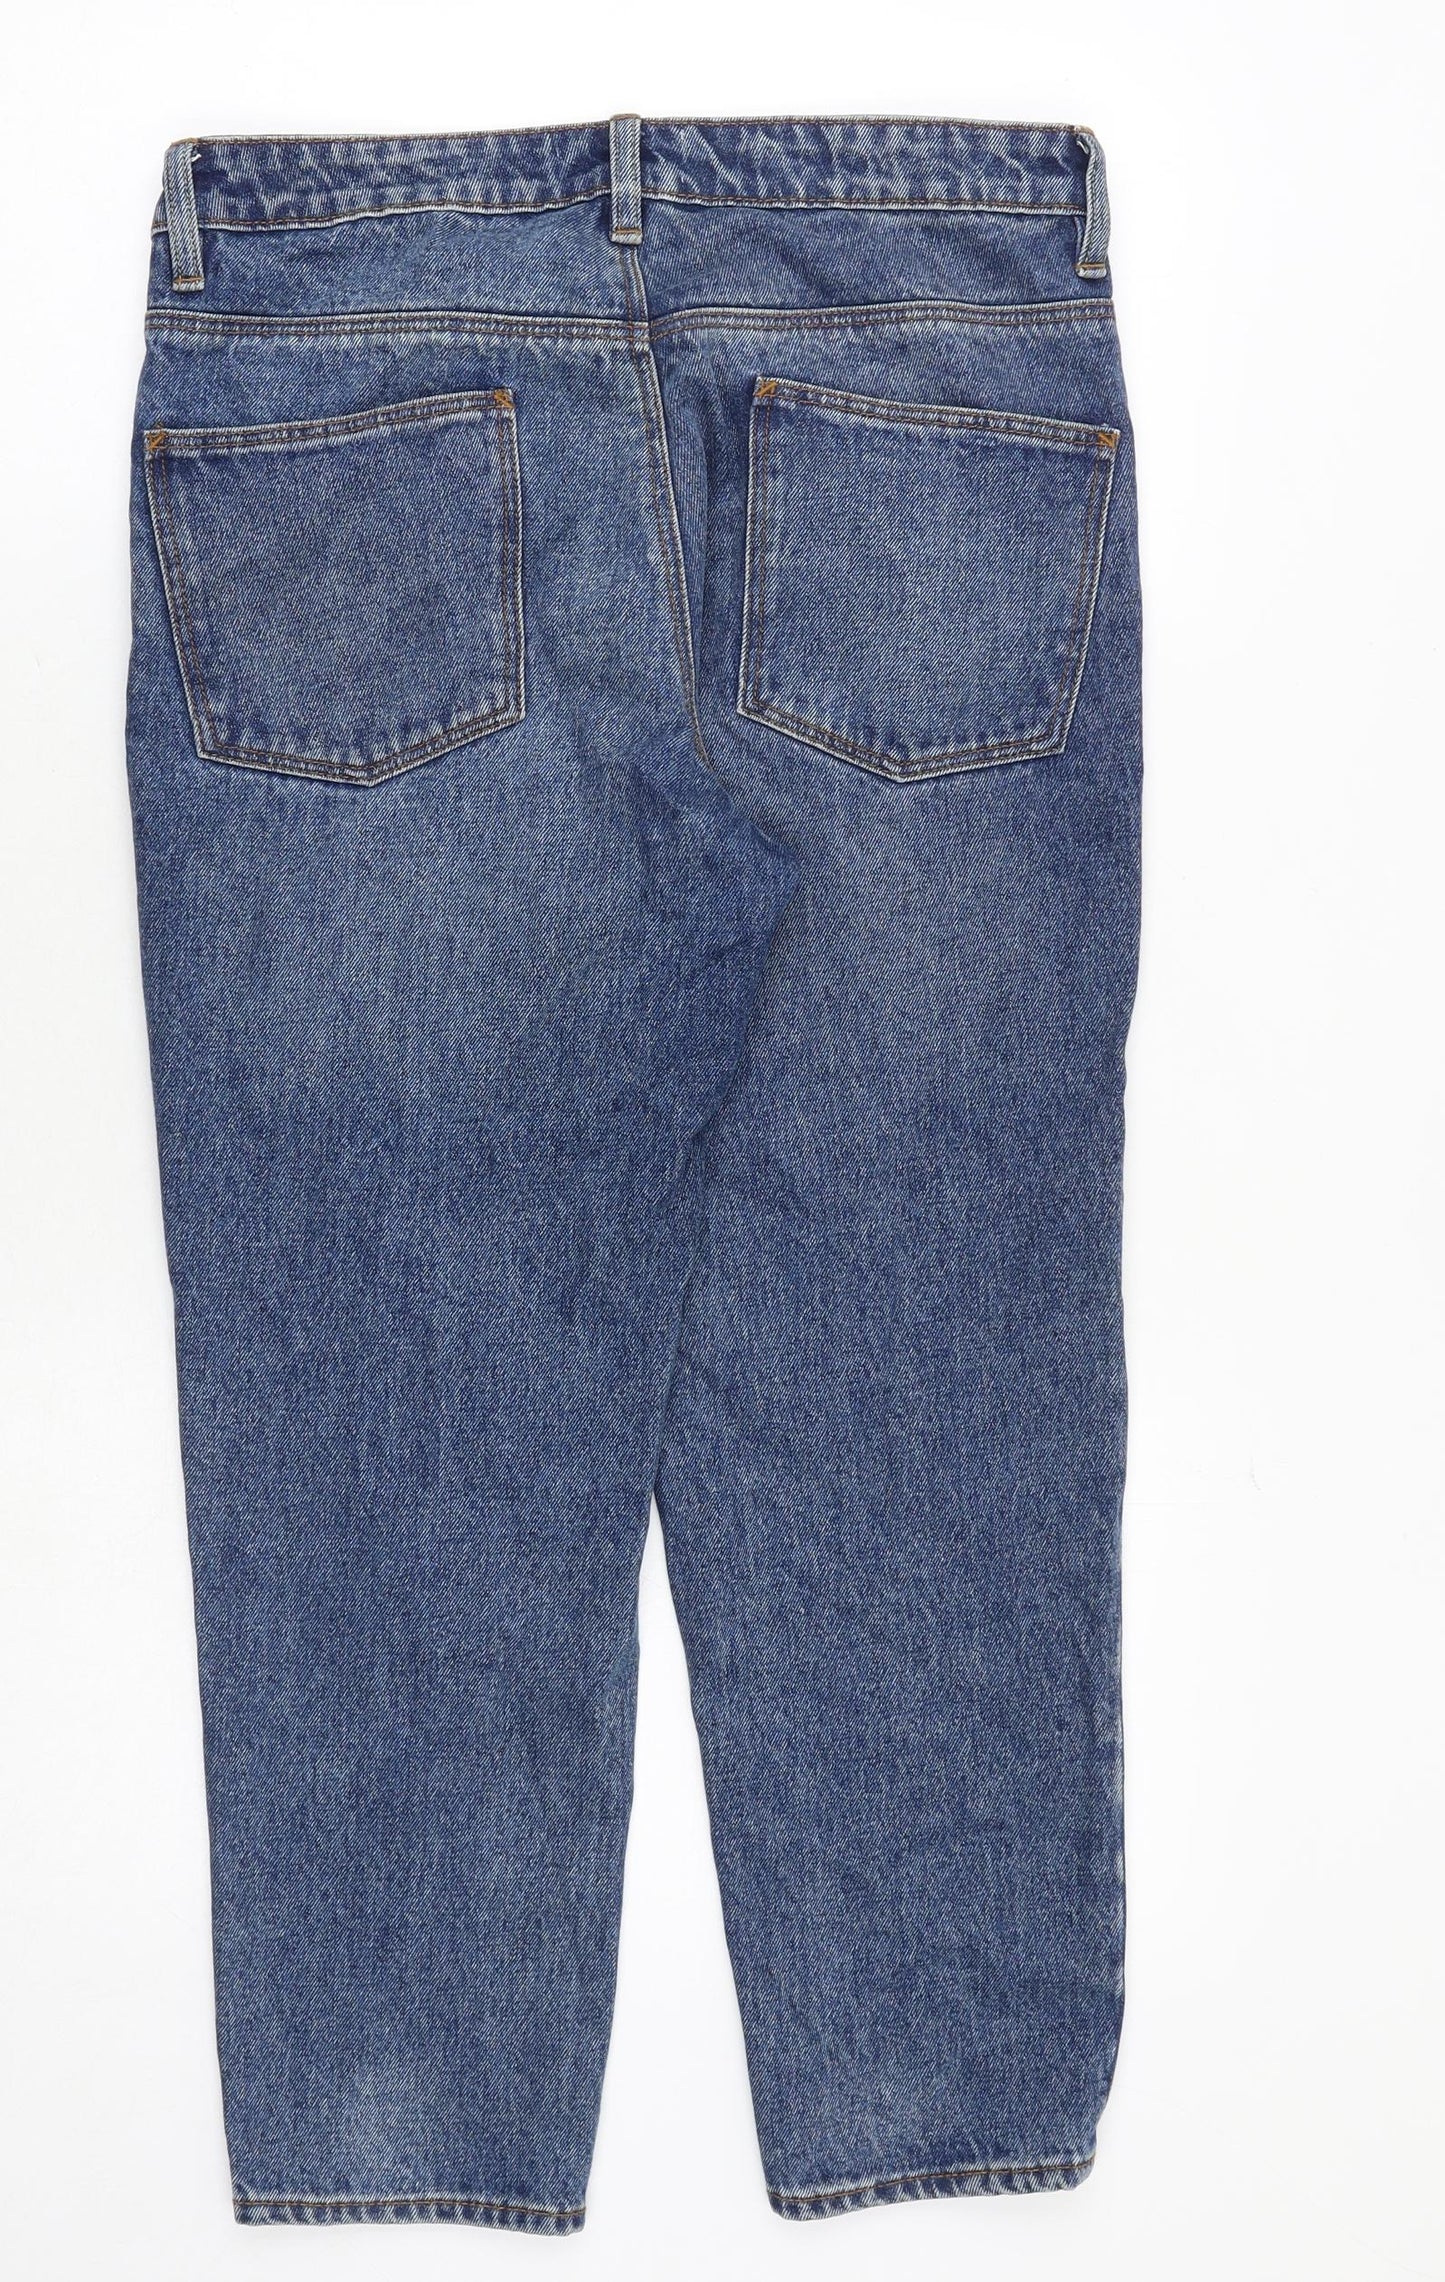 ASOS Mens Blue Cotton Tapered Jeans Size 30 in Regular Zip